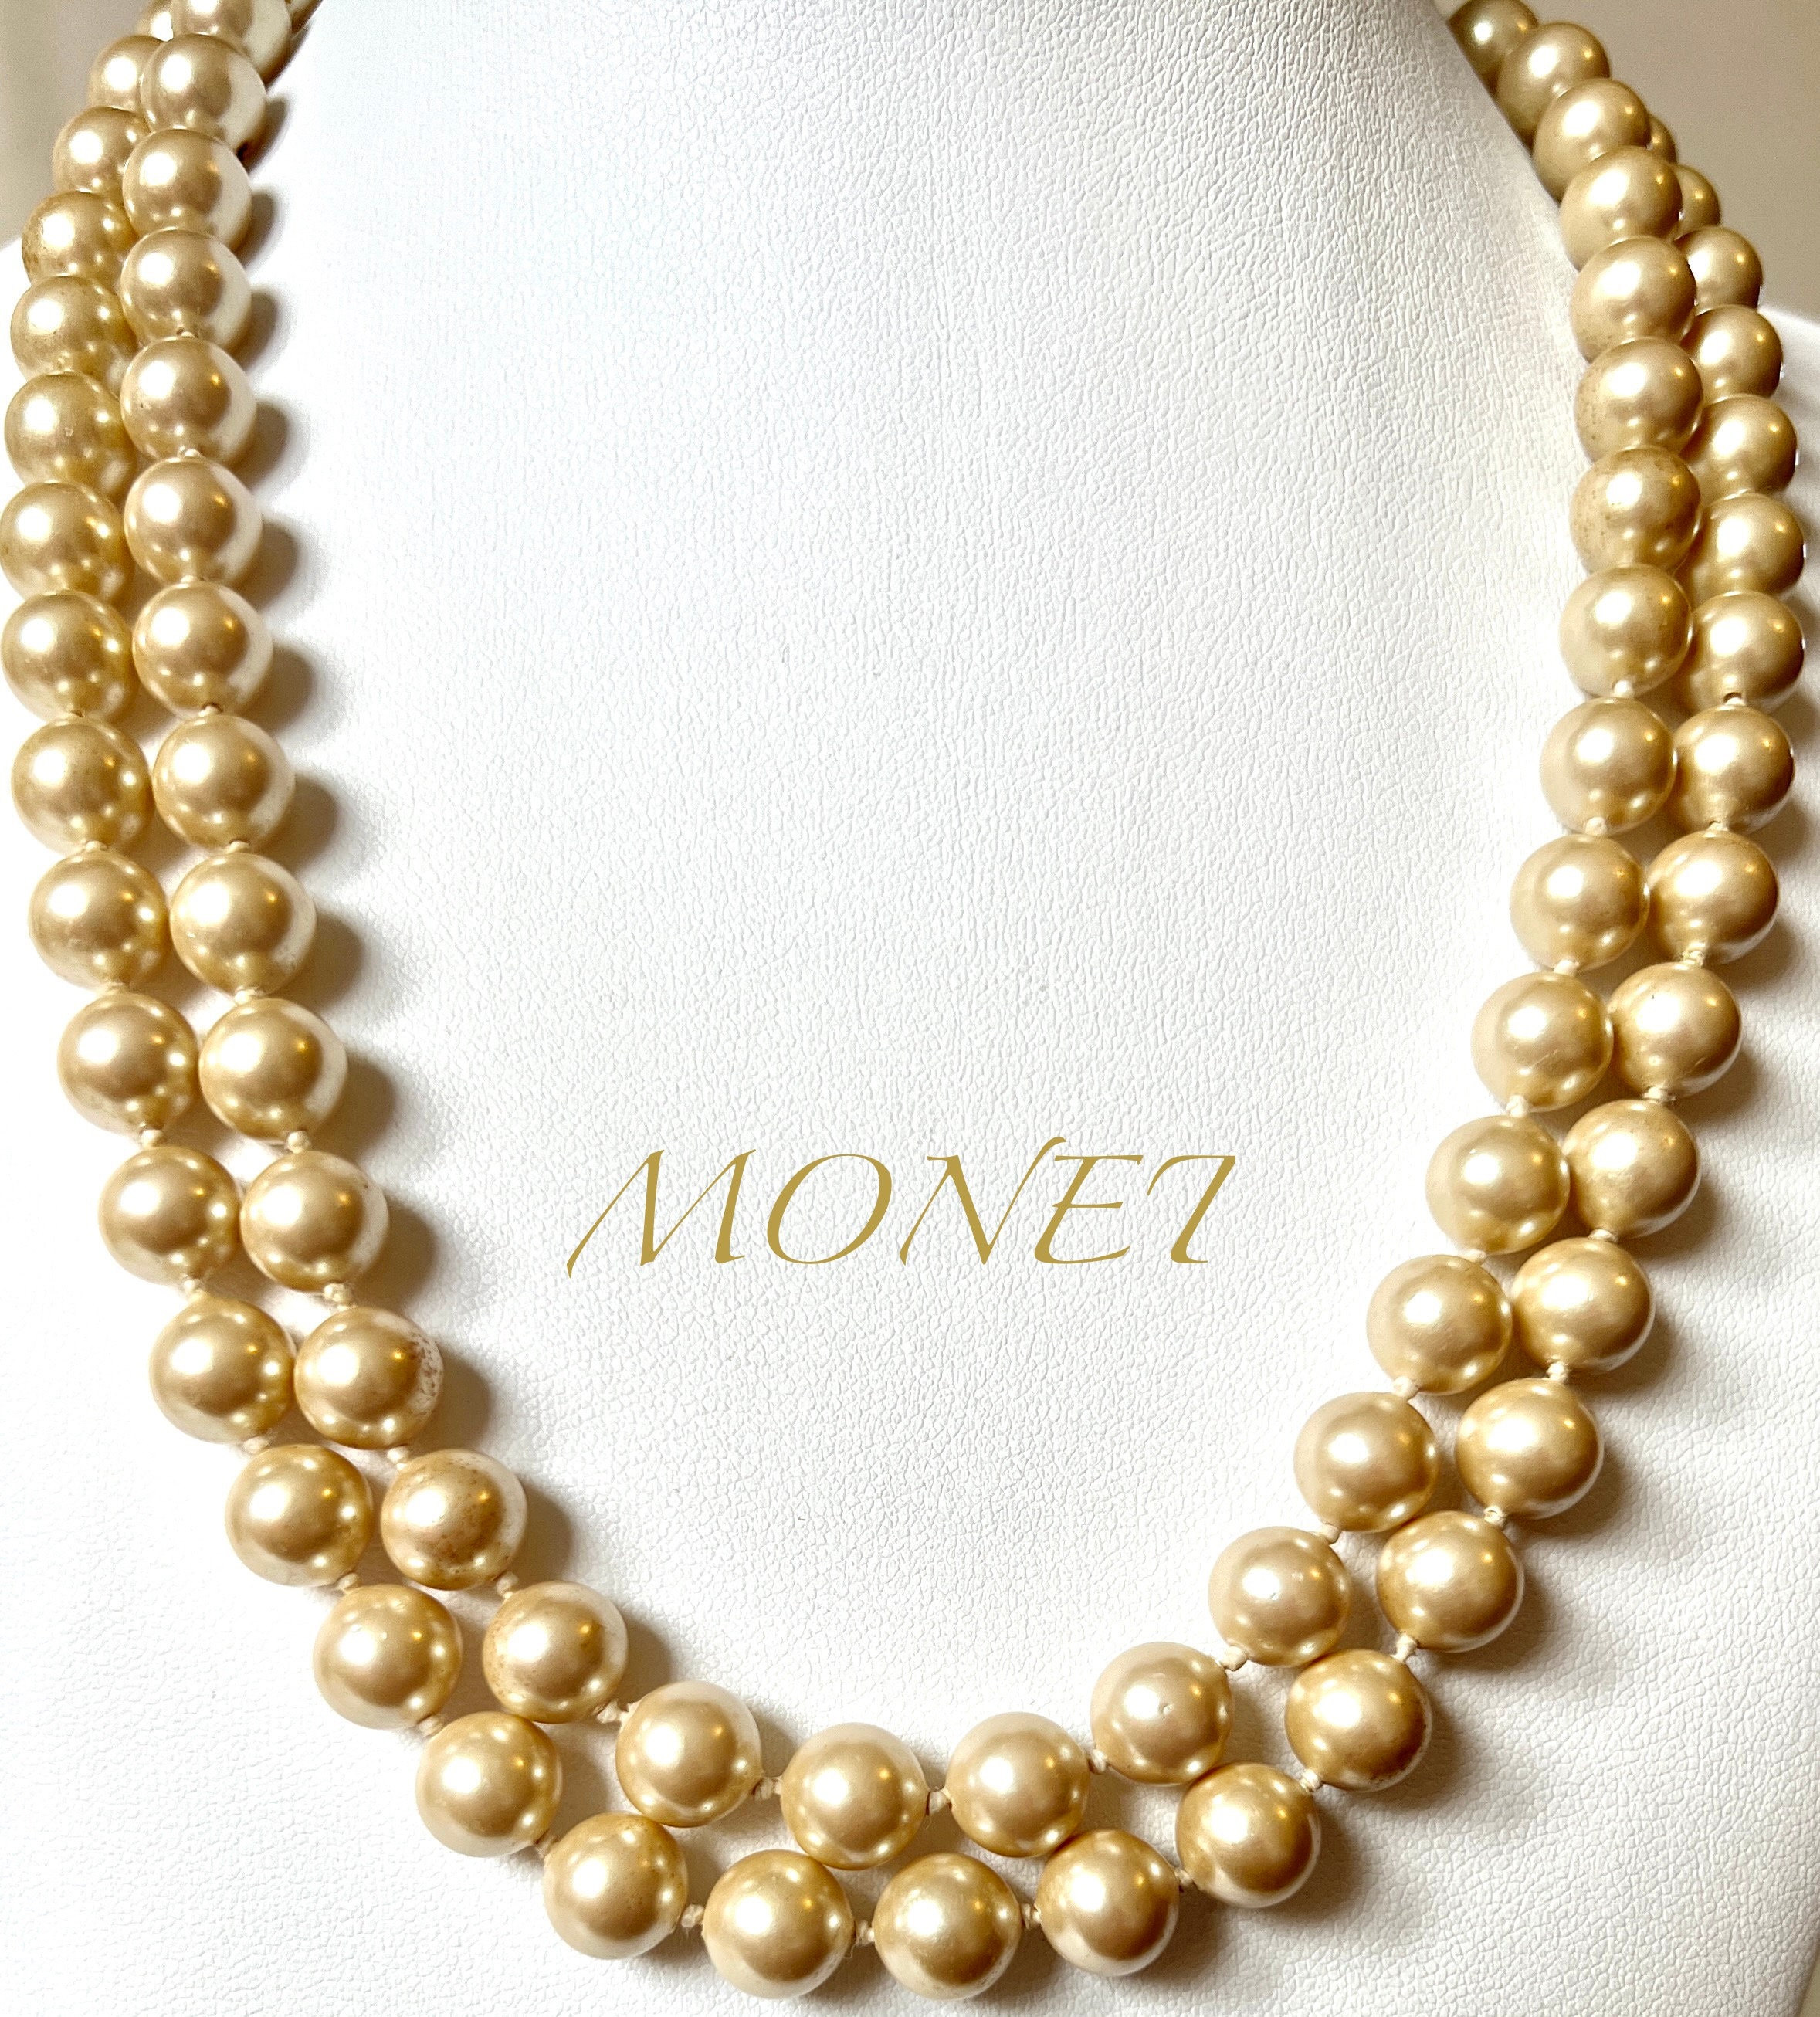 Vintage Monet Necklace, 1980s Cream & Silver Simulated Pearls - Ruby Lane